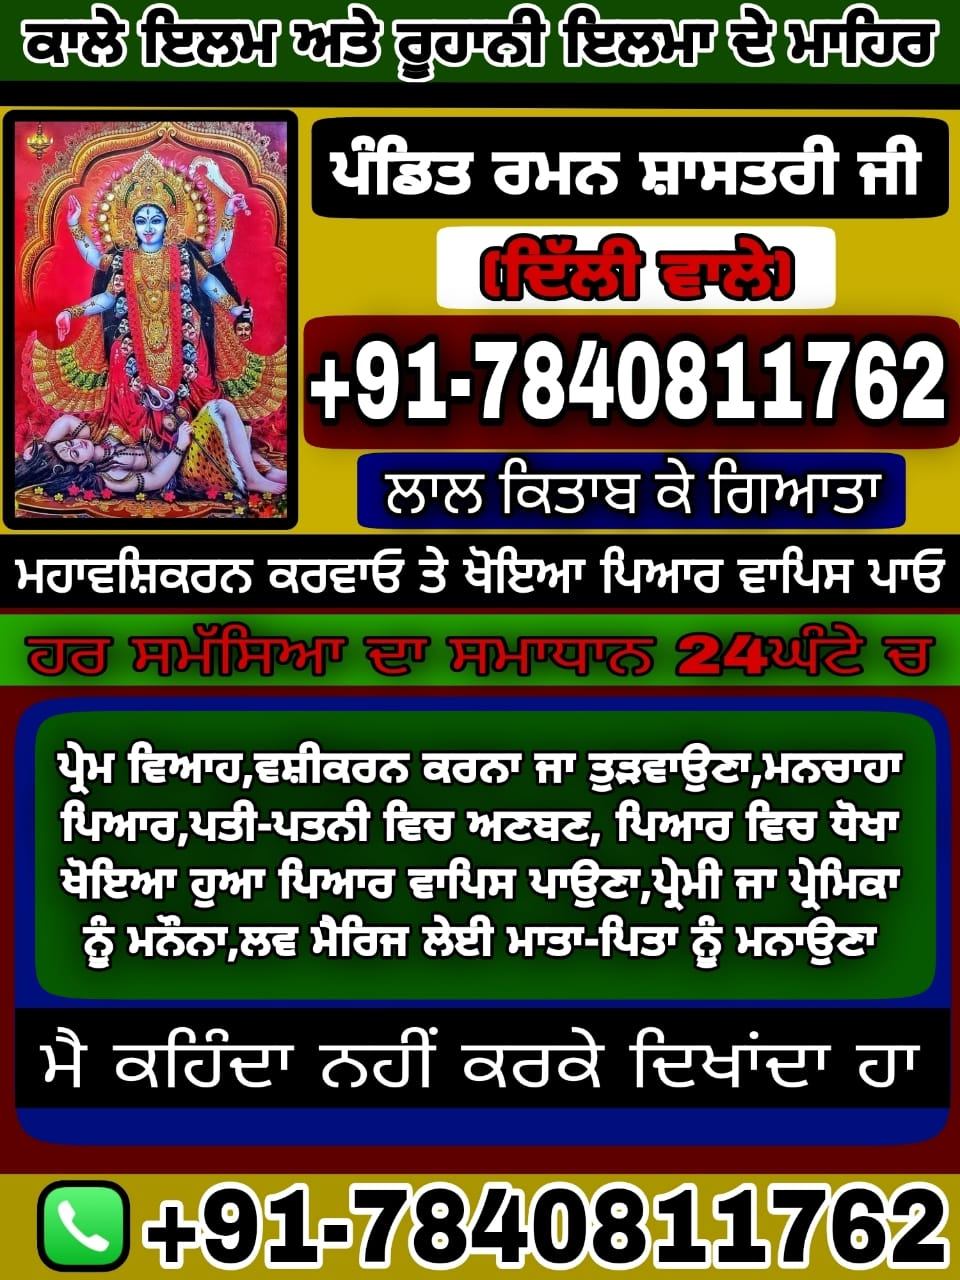 no.1 astrologer in INDIA.all problems solution within only 24 hours